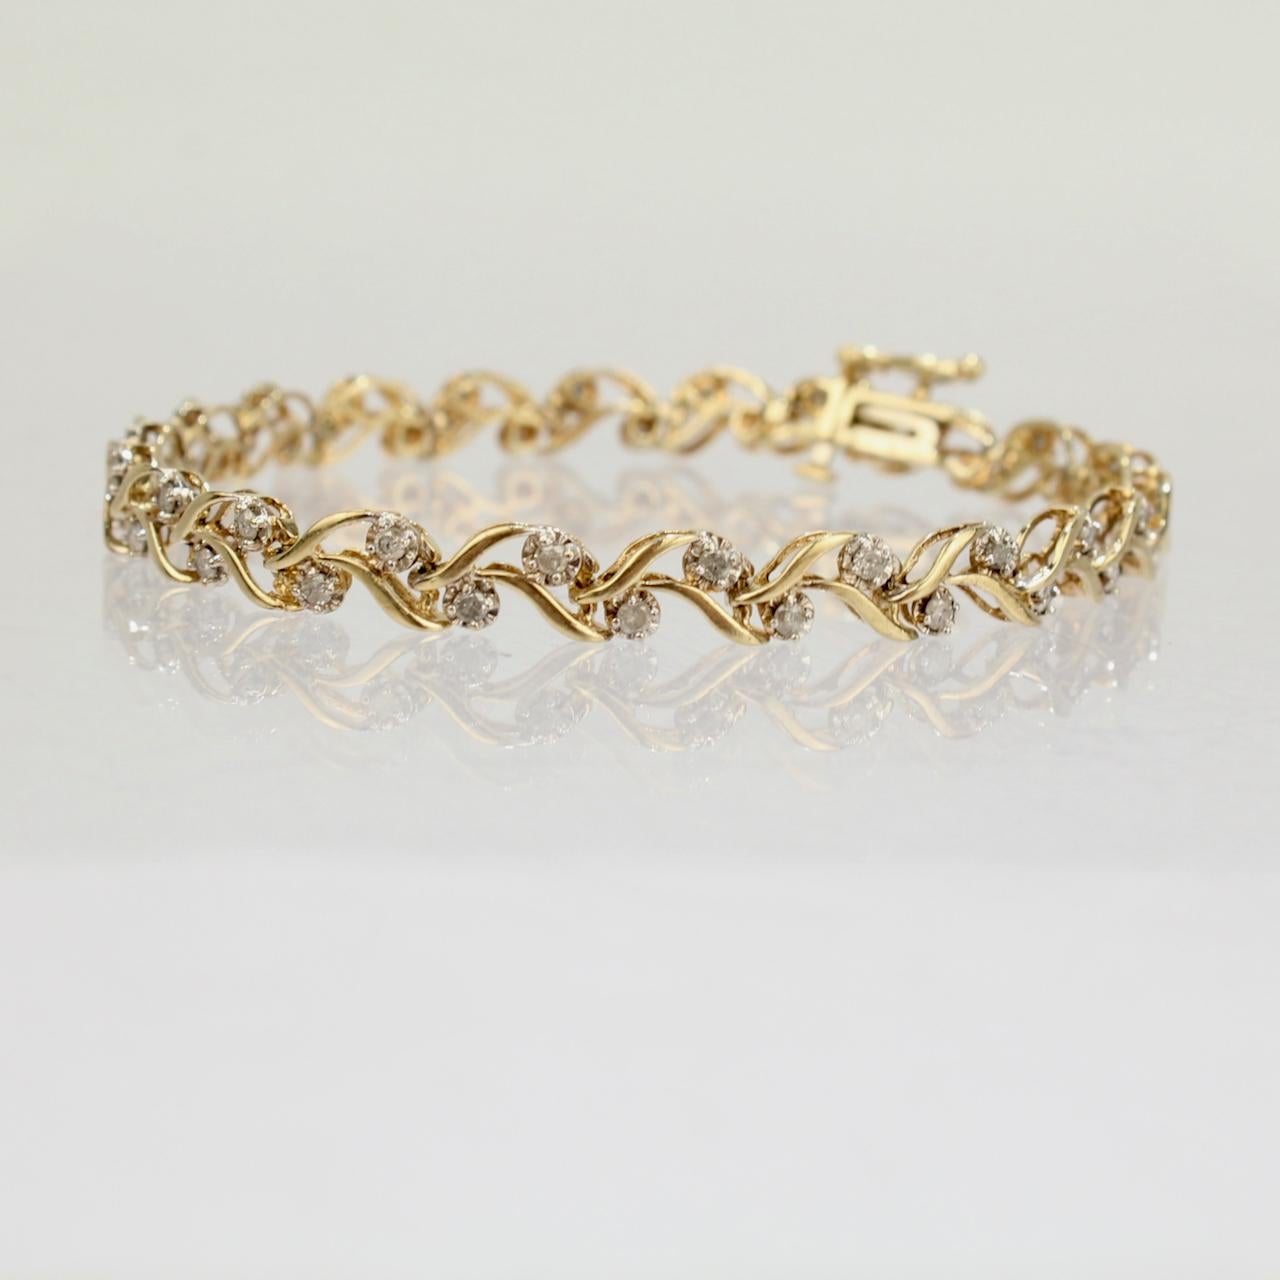 A very fine 10k gold and diamond tennis bracelet.

Date:
20th century

Overall Condition:
It is in overall good, as-pictured, used estate condition with some very fine and light surface scratches and other signs of expected light wear consistent